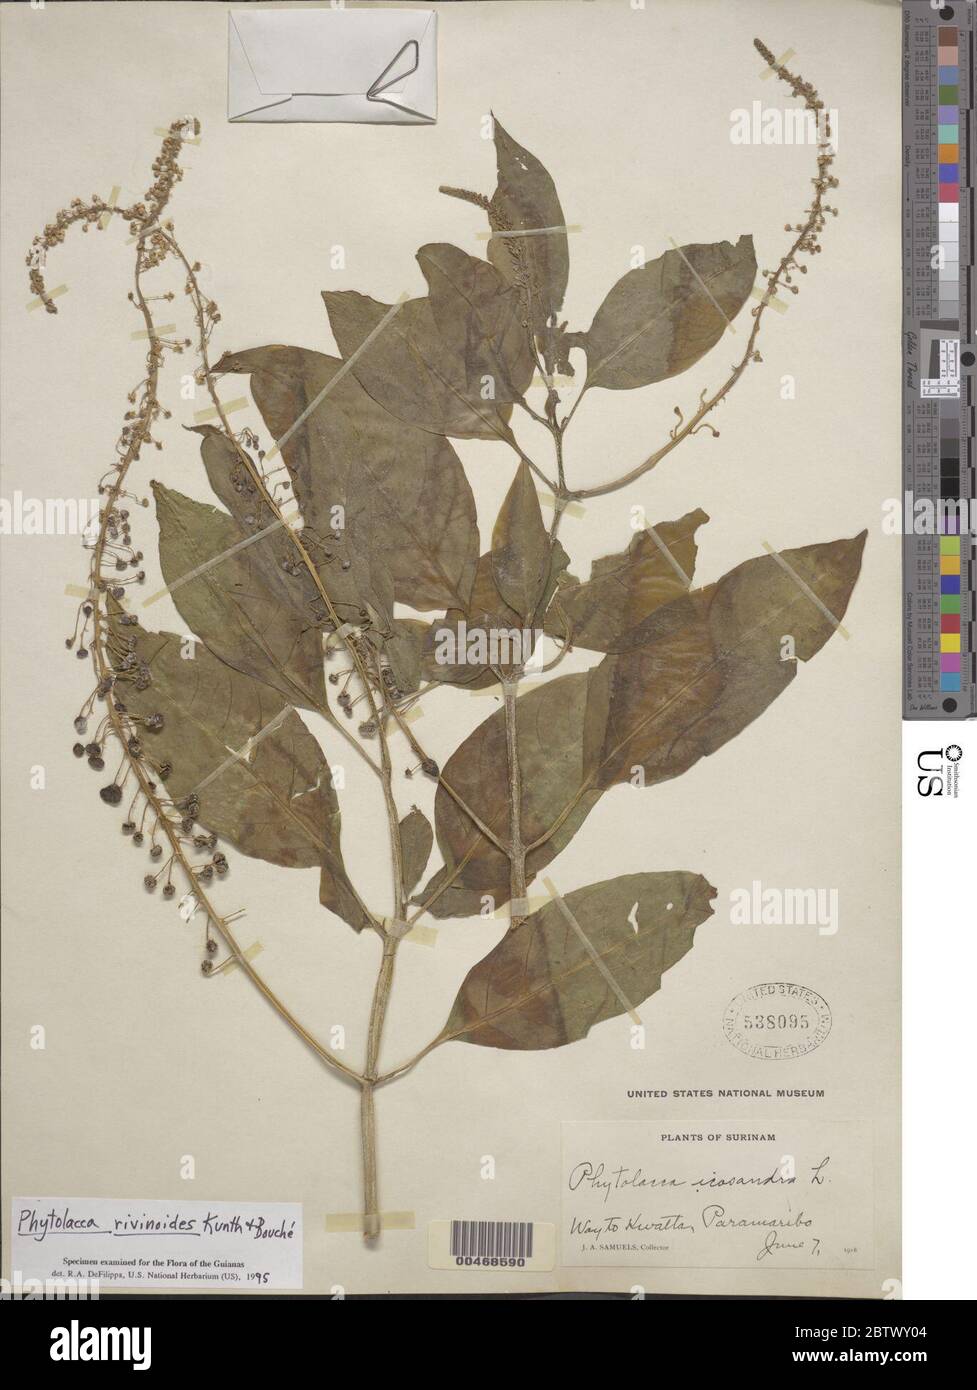 Phytolacca rivinoides Kunth CD Bouch. Stock Photo